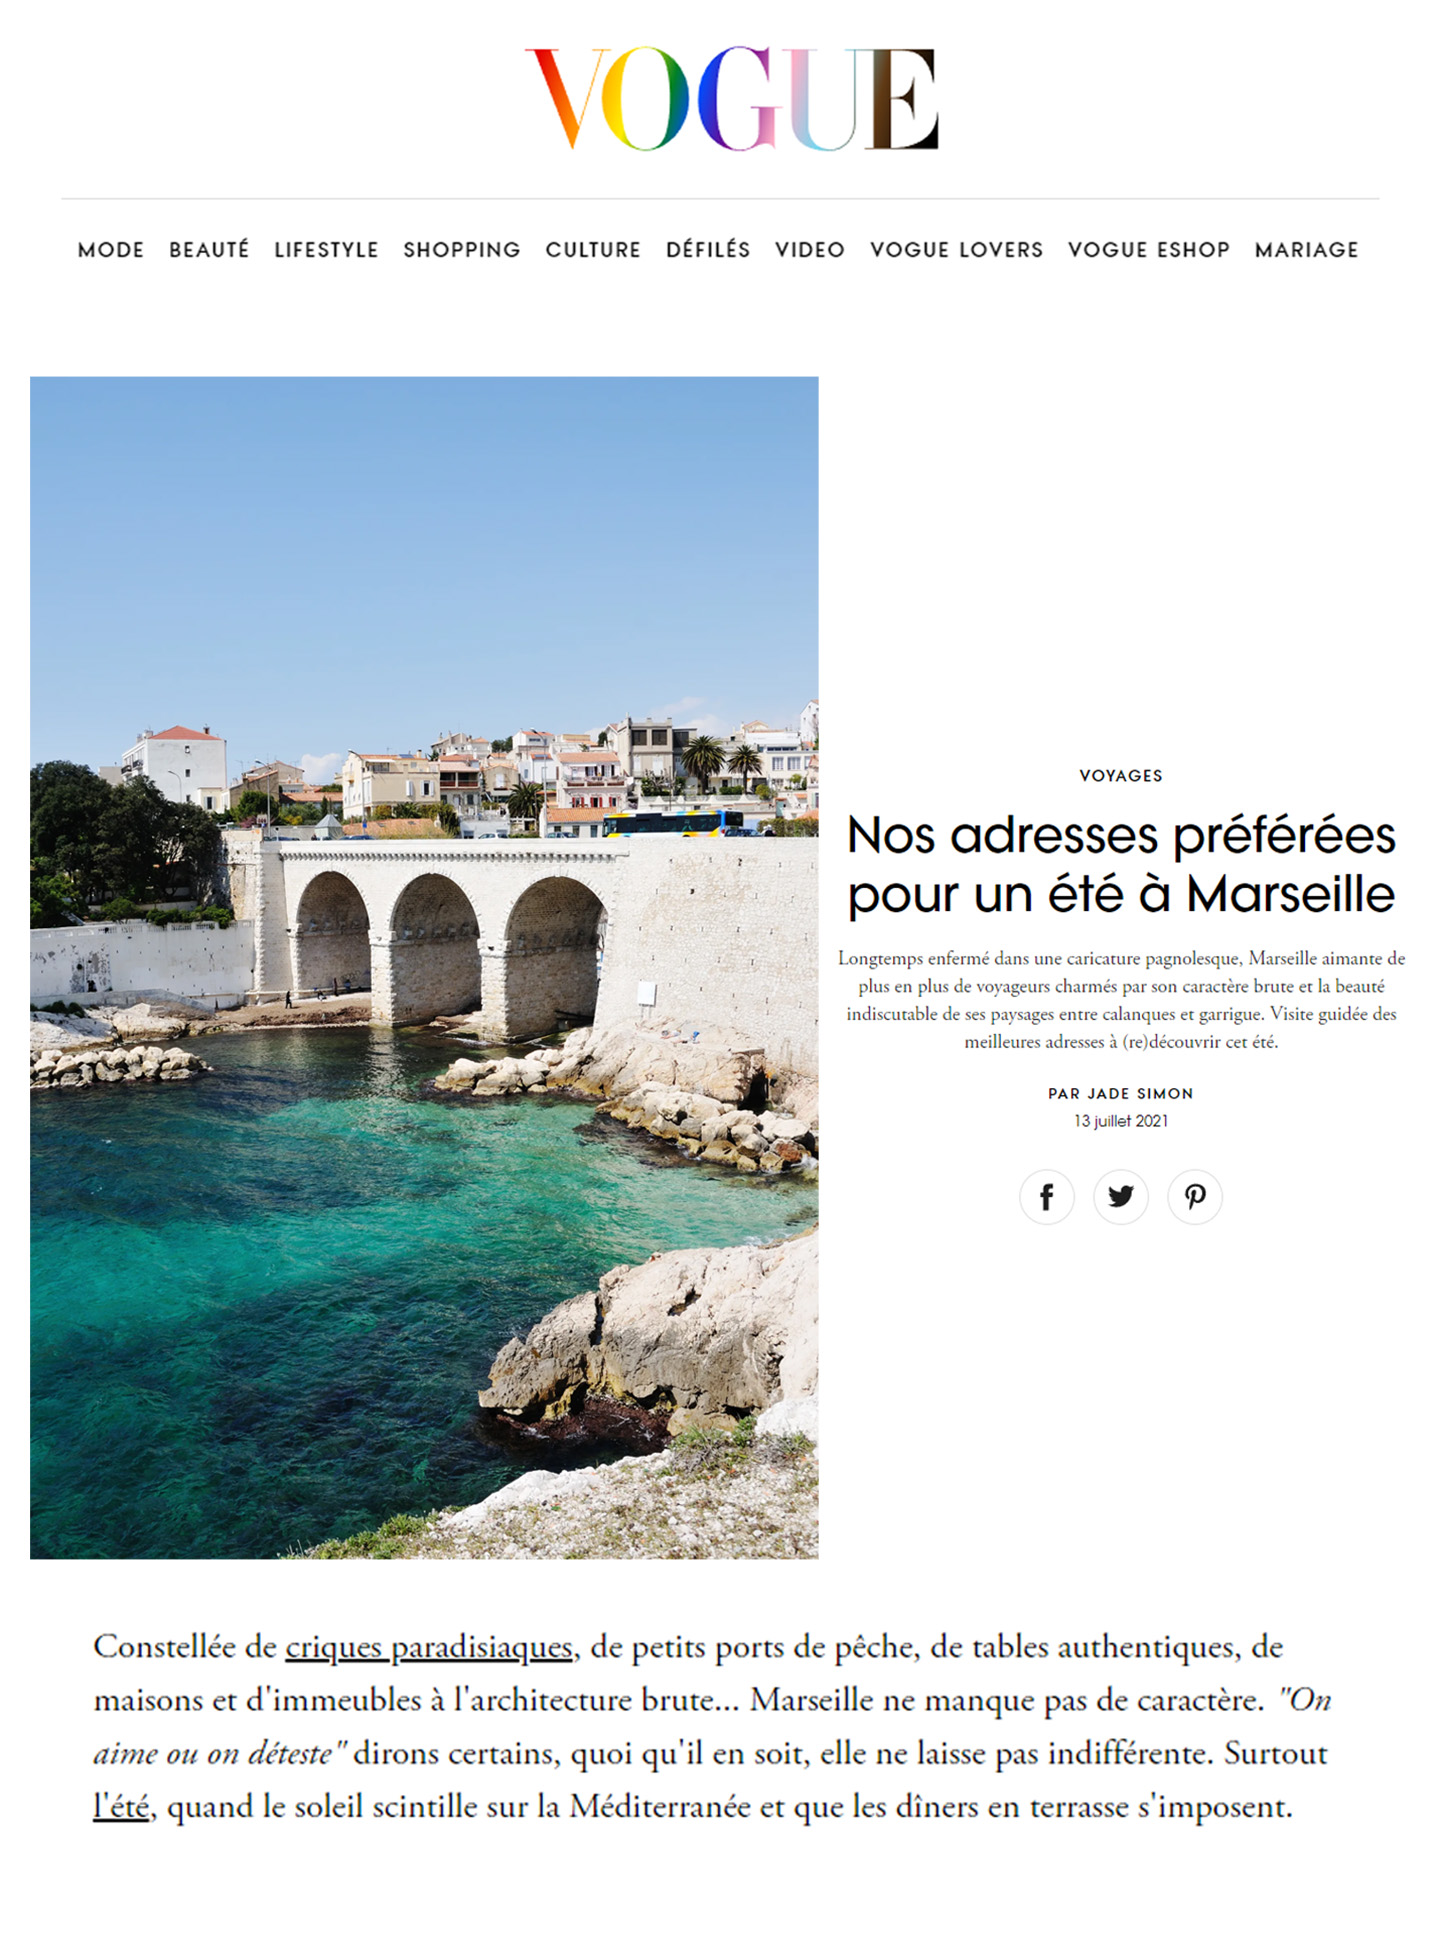 Article on the InterContinental marseille Hotel Dieu realized by the studio jean-Philippe Nuel in the magazine vogue, new luxury hotel, luxury interior design, historical heritage